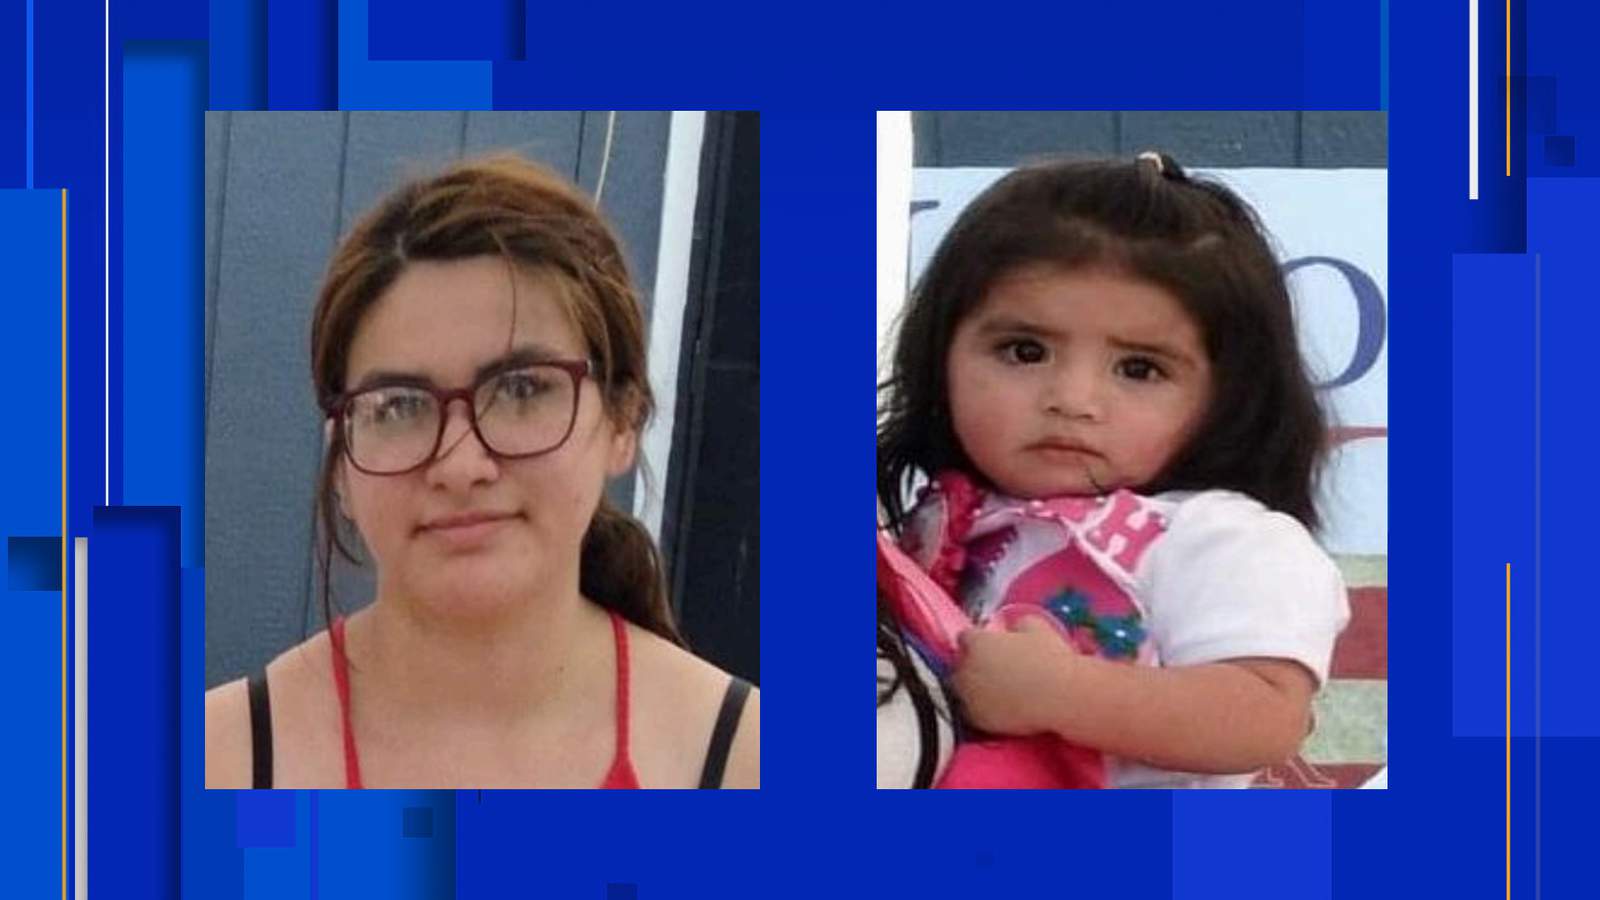 Missing child, 21-year-old woman found safe, San Antonio police say